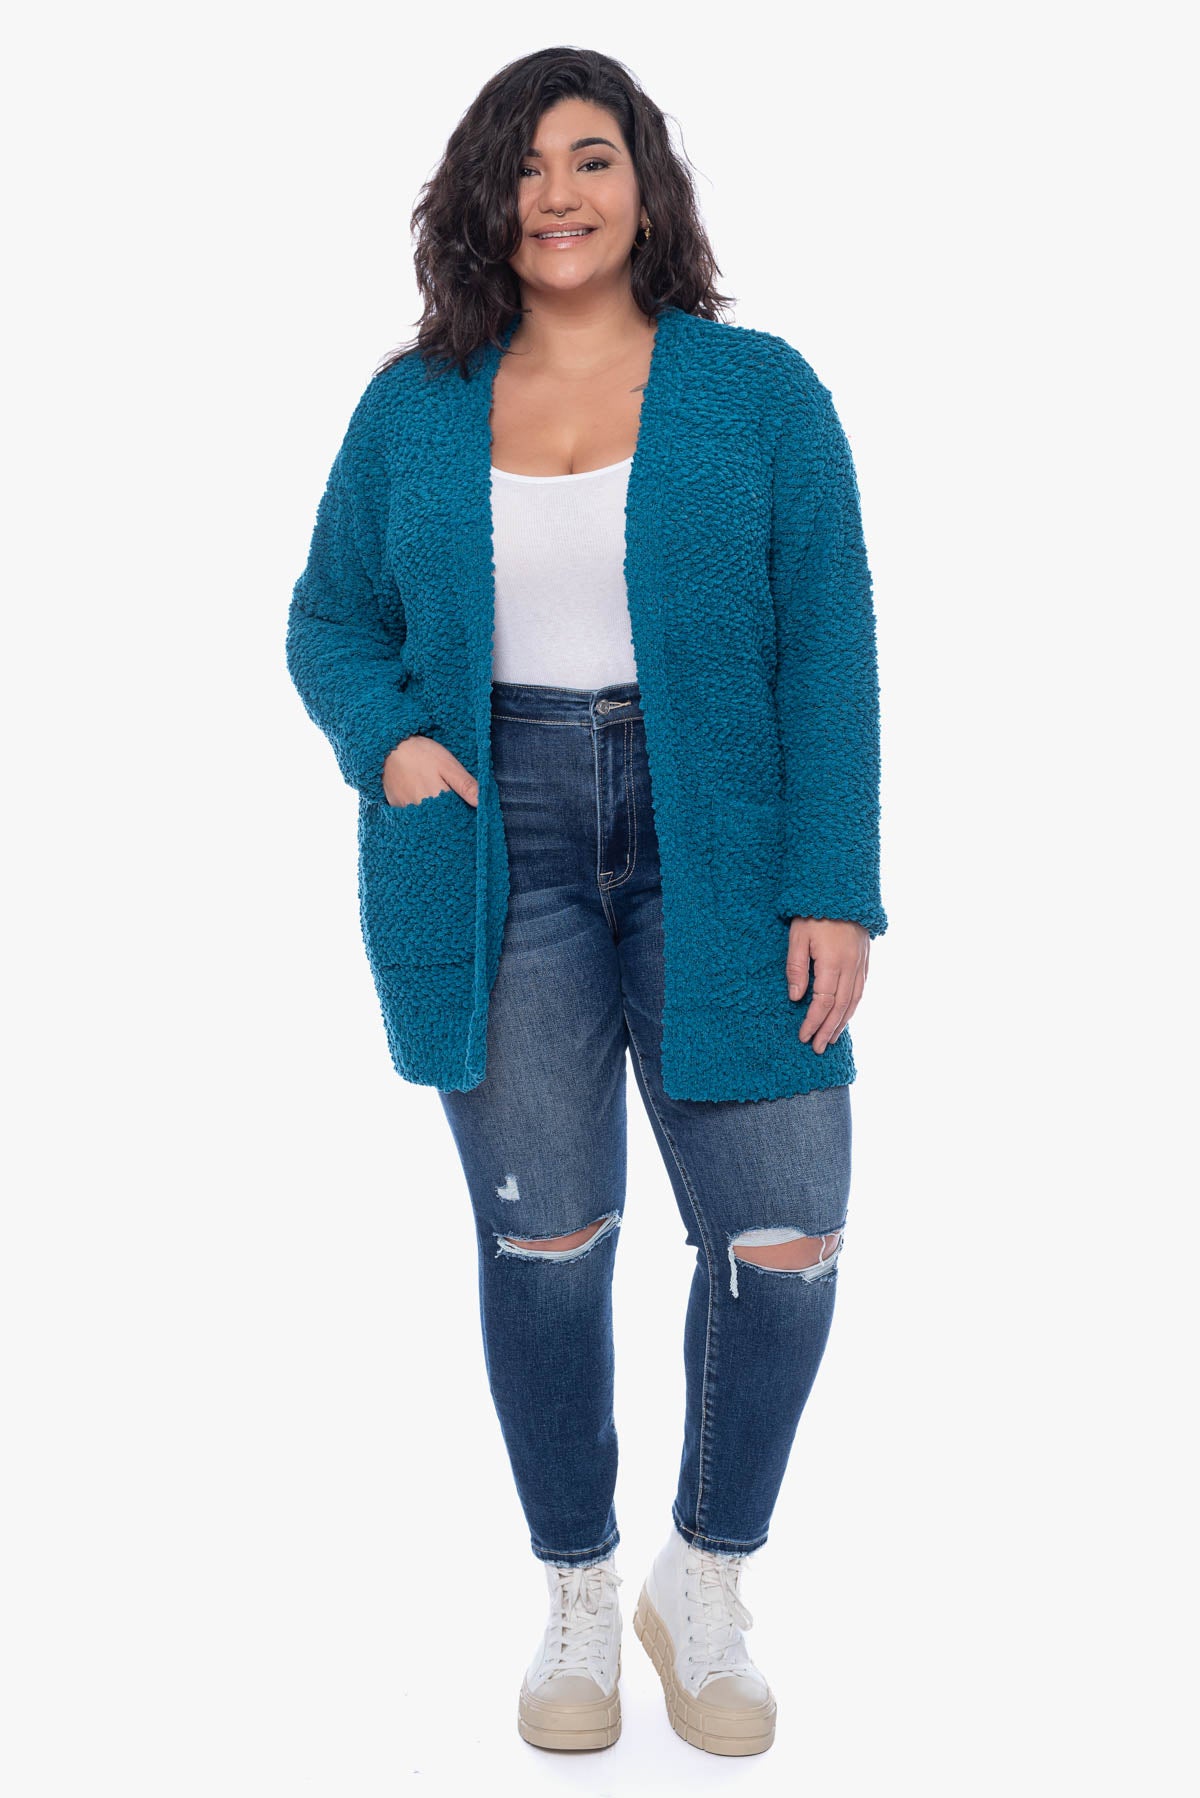 VERENA knitted sweater